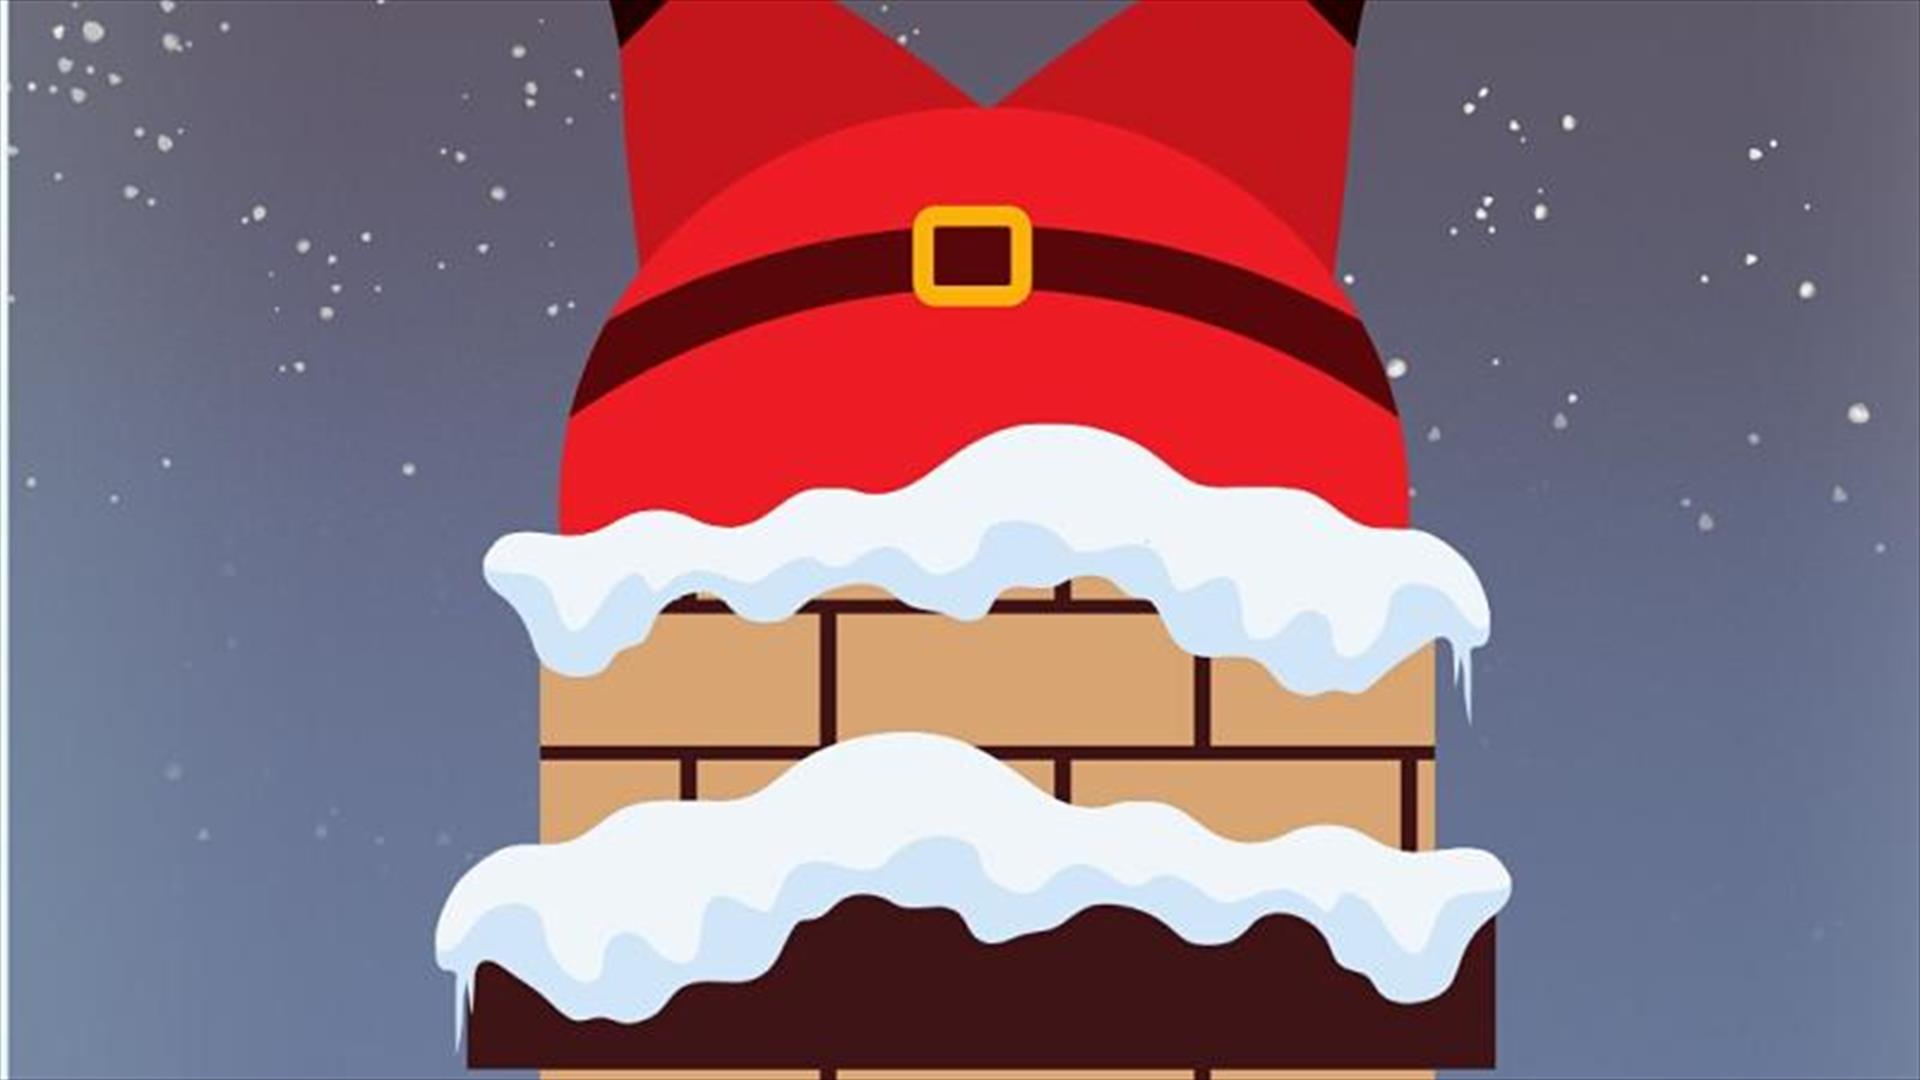 Animated drawing of Santa legs sticking out of the snowy chimney